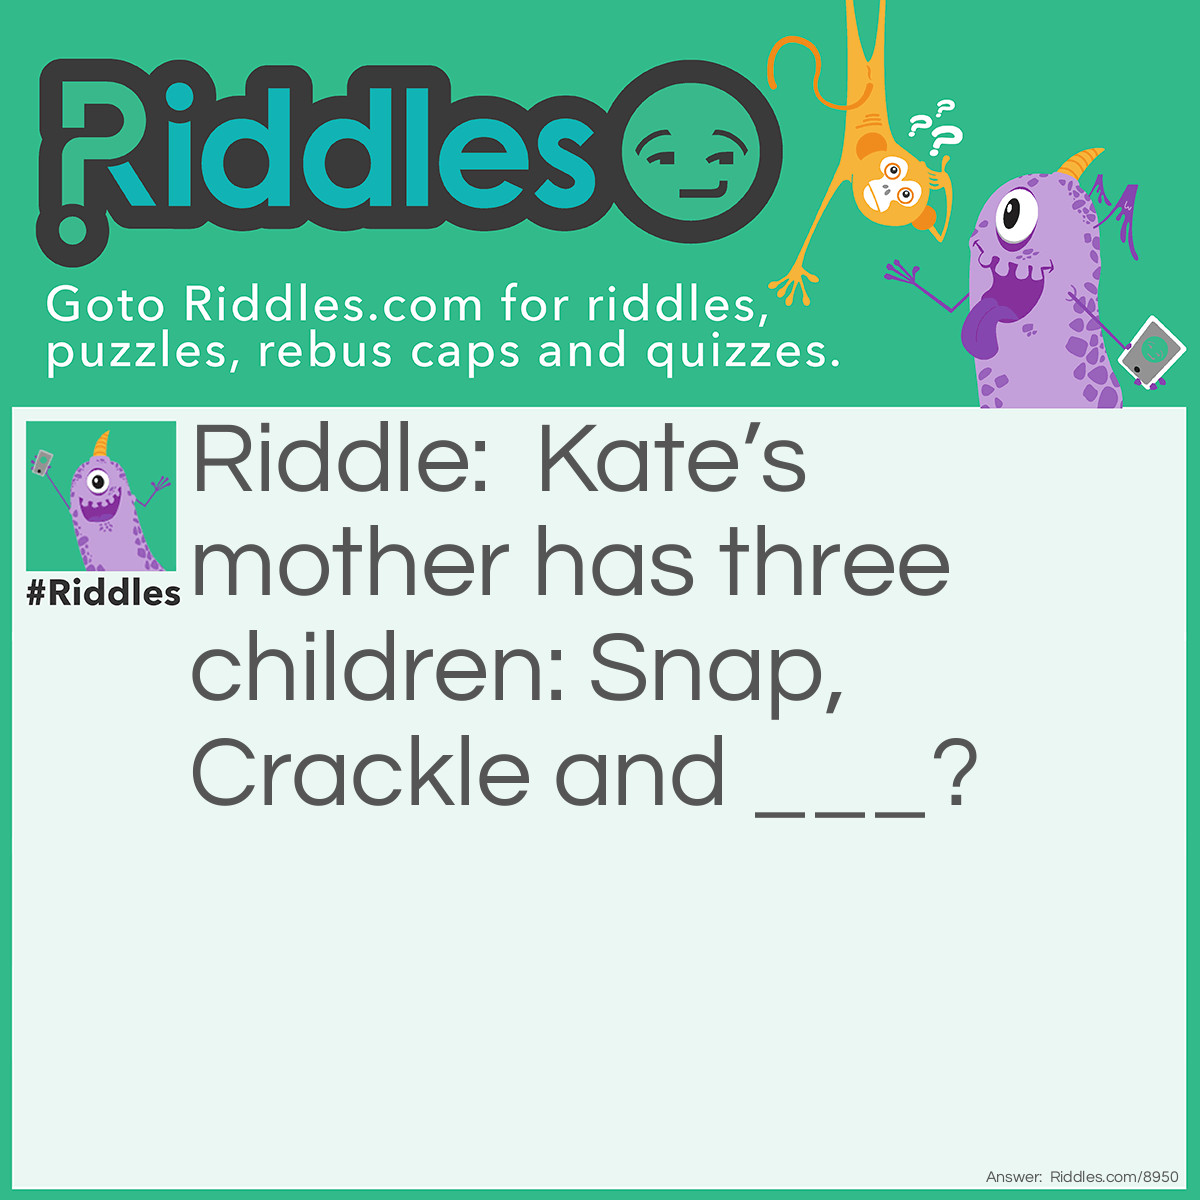 Riddle: Kate's mother has three children: Snap, Crackle and ___? Answer: Kate.